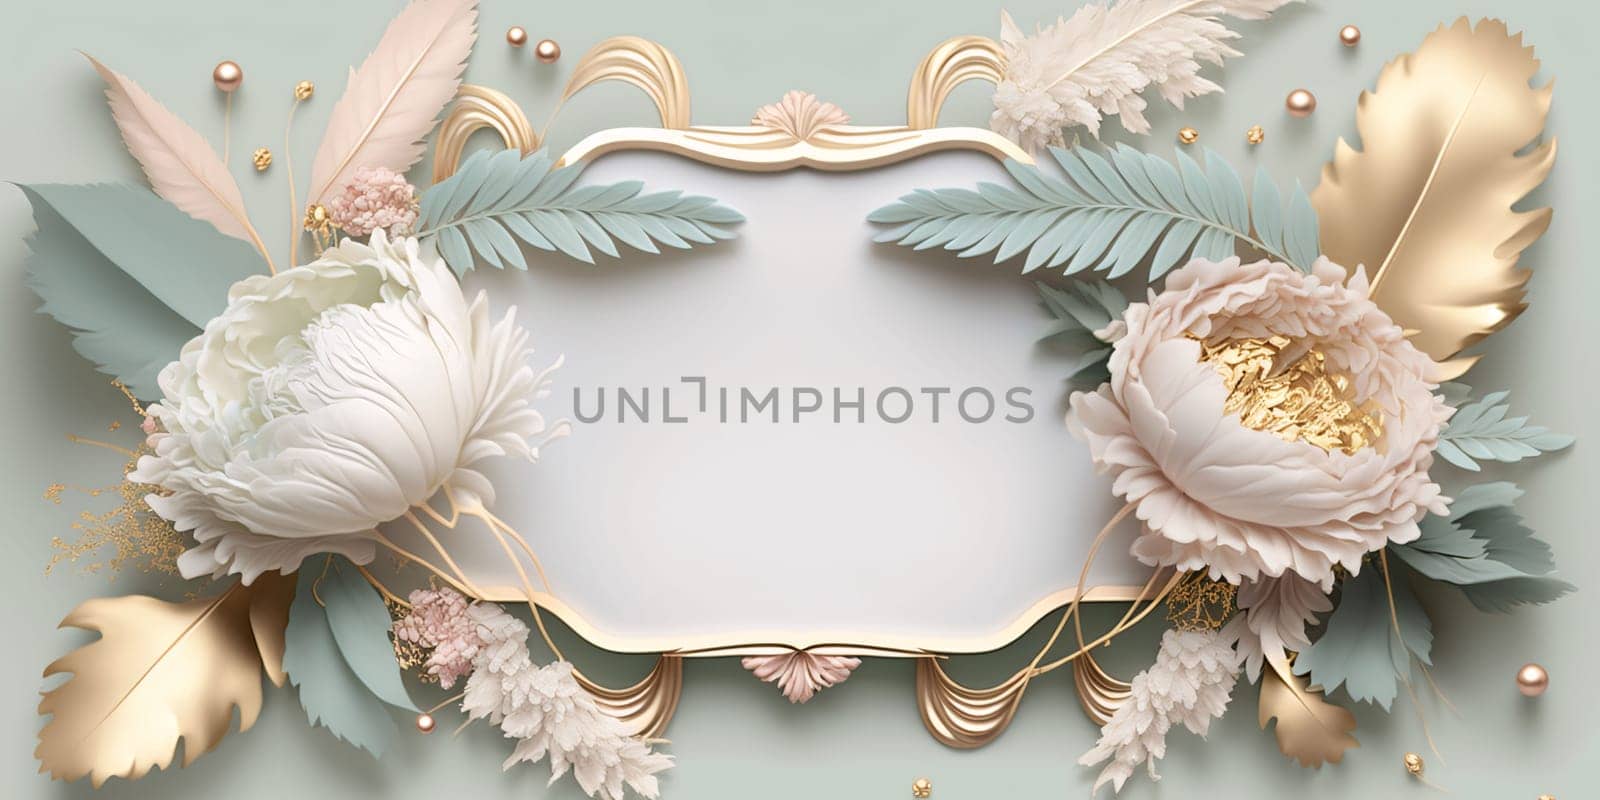 White blank card with space for your own content. All around embellishments of bright flowers and leaves. Graphic with space for your own content.